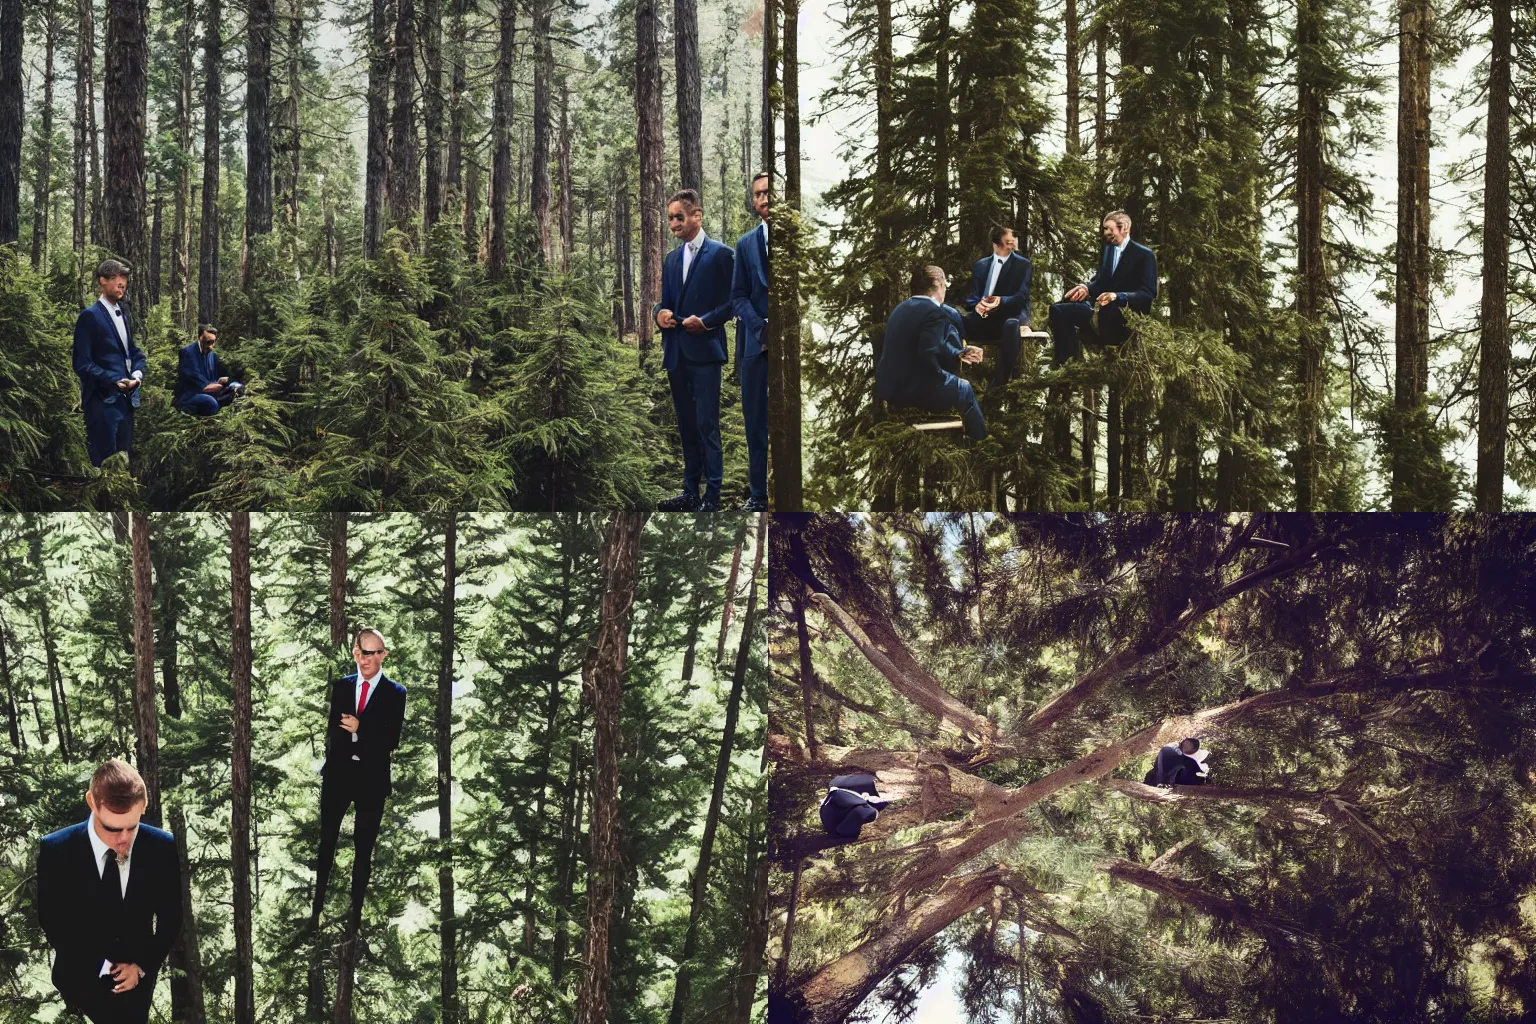 Prompt: men in suits sitting in the top of pine trees in a forest